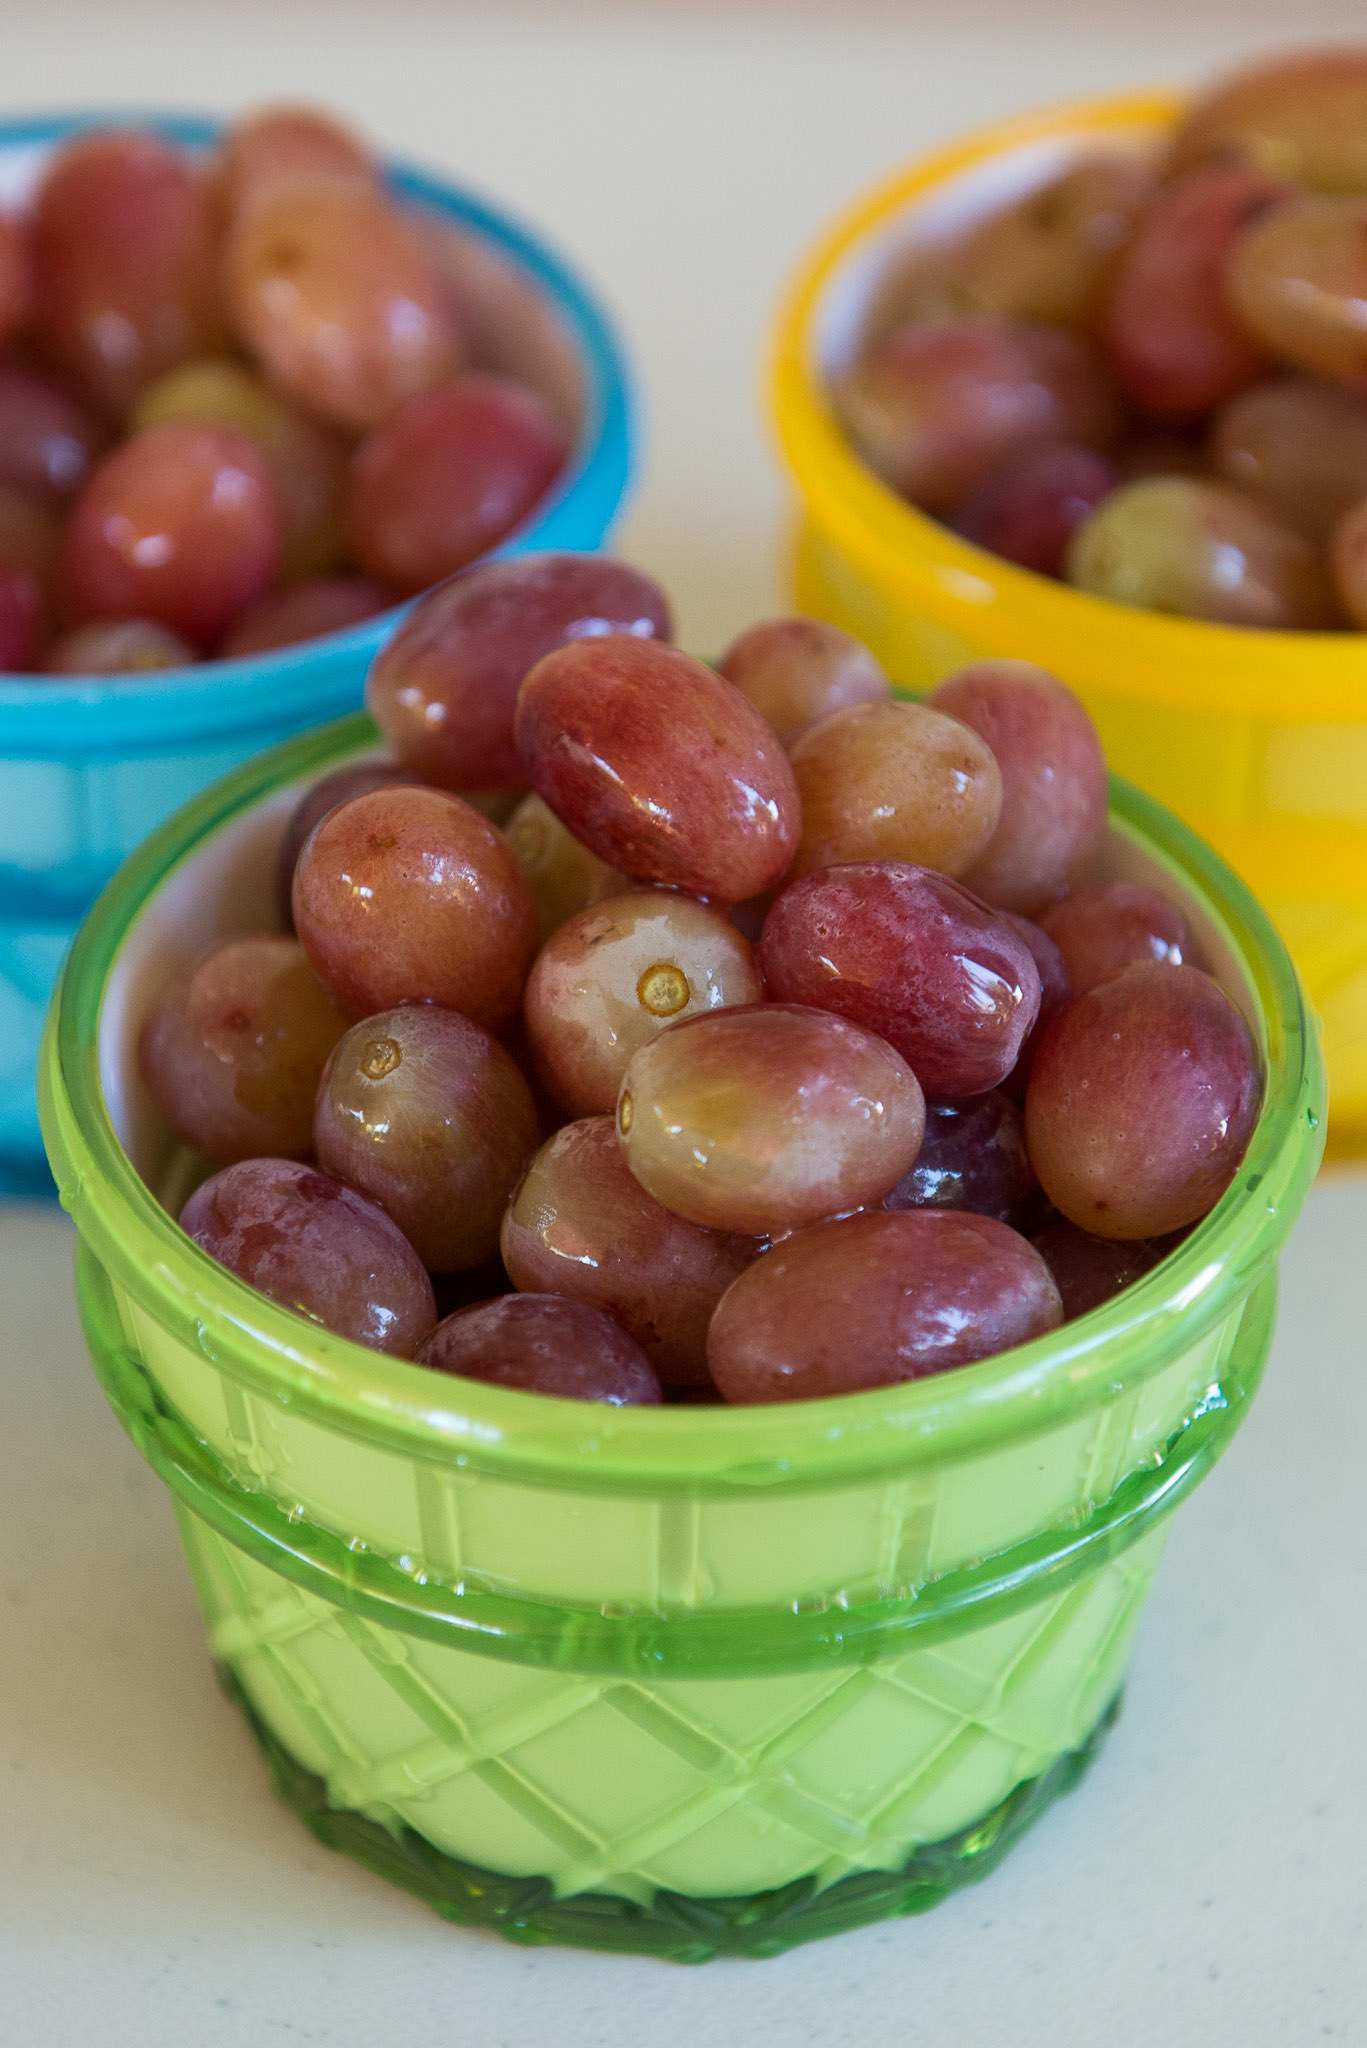 Seedless red grapes